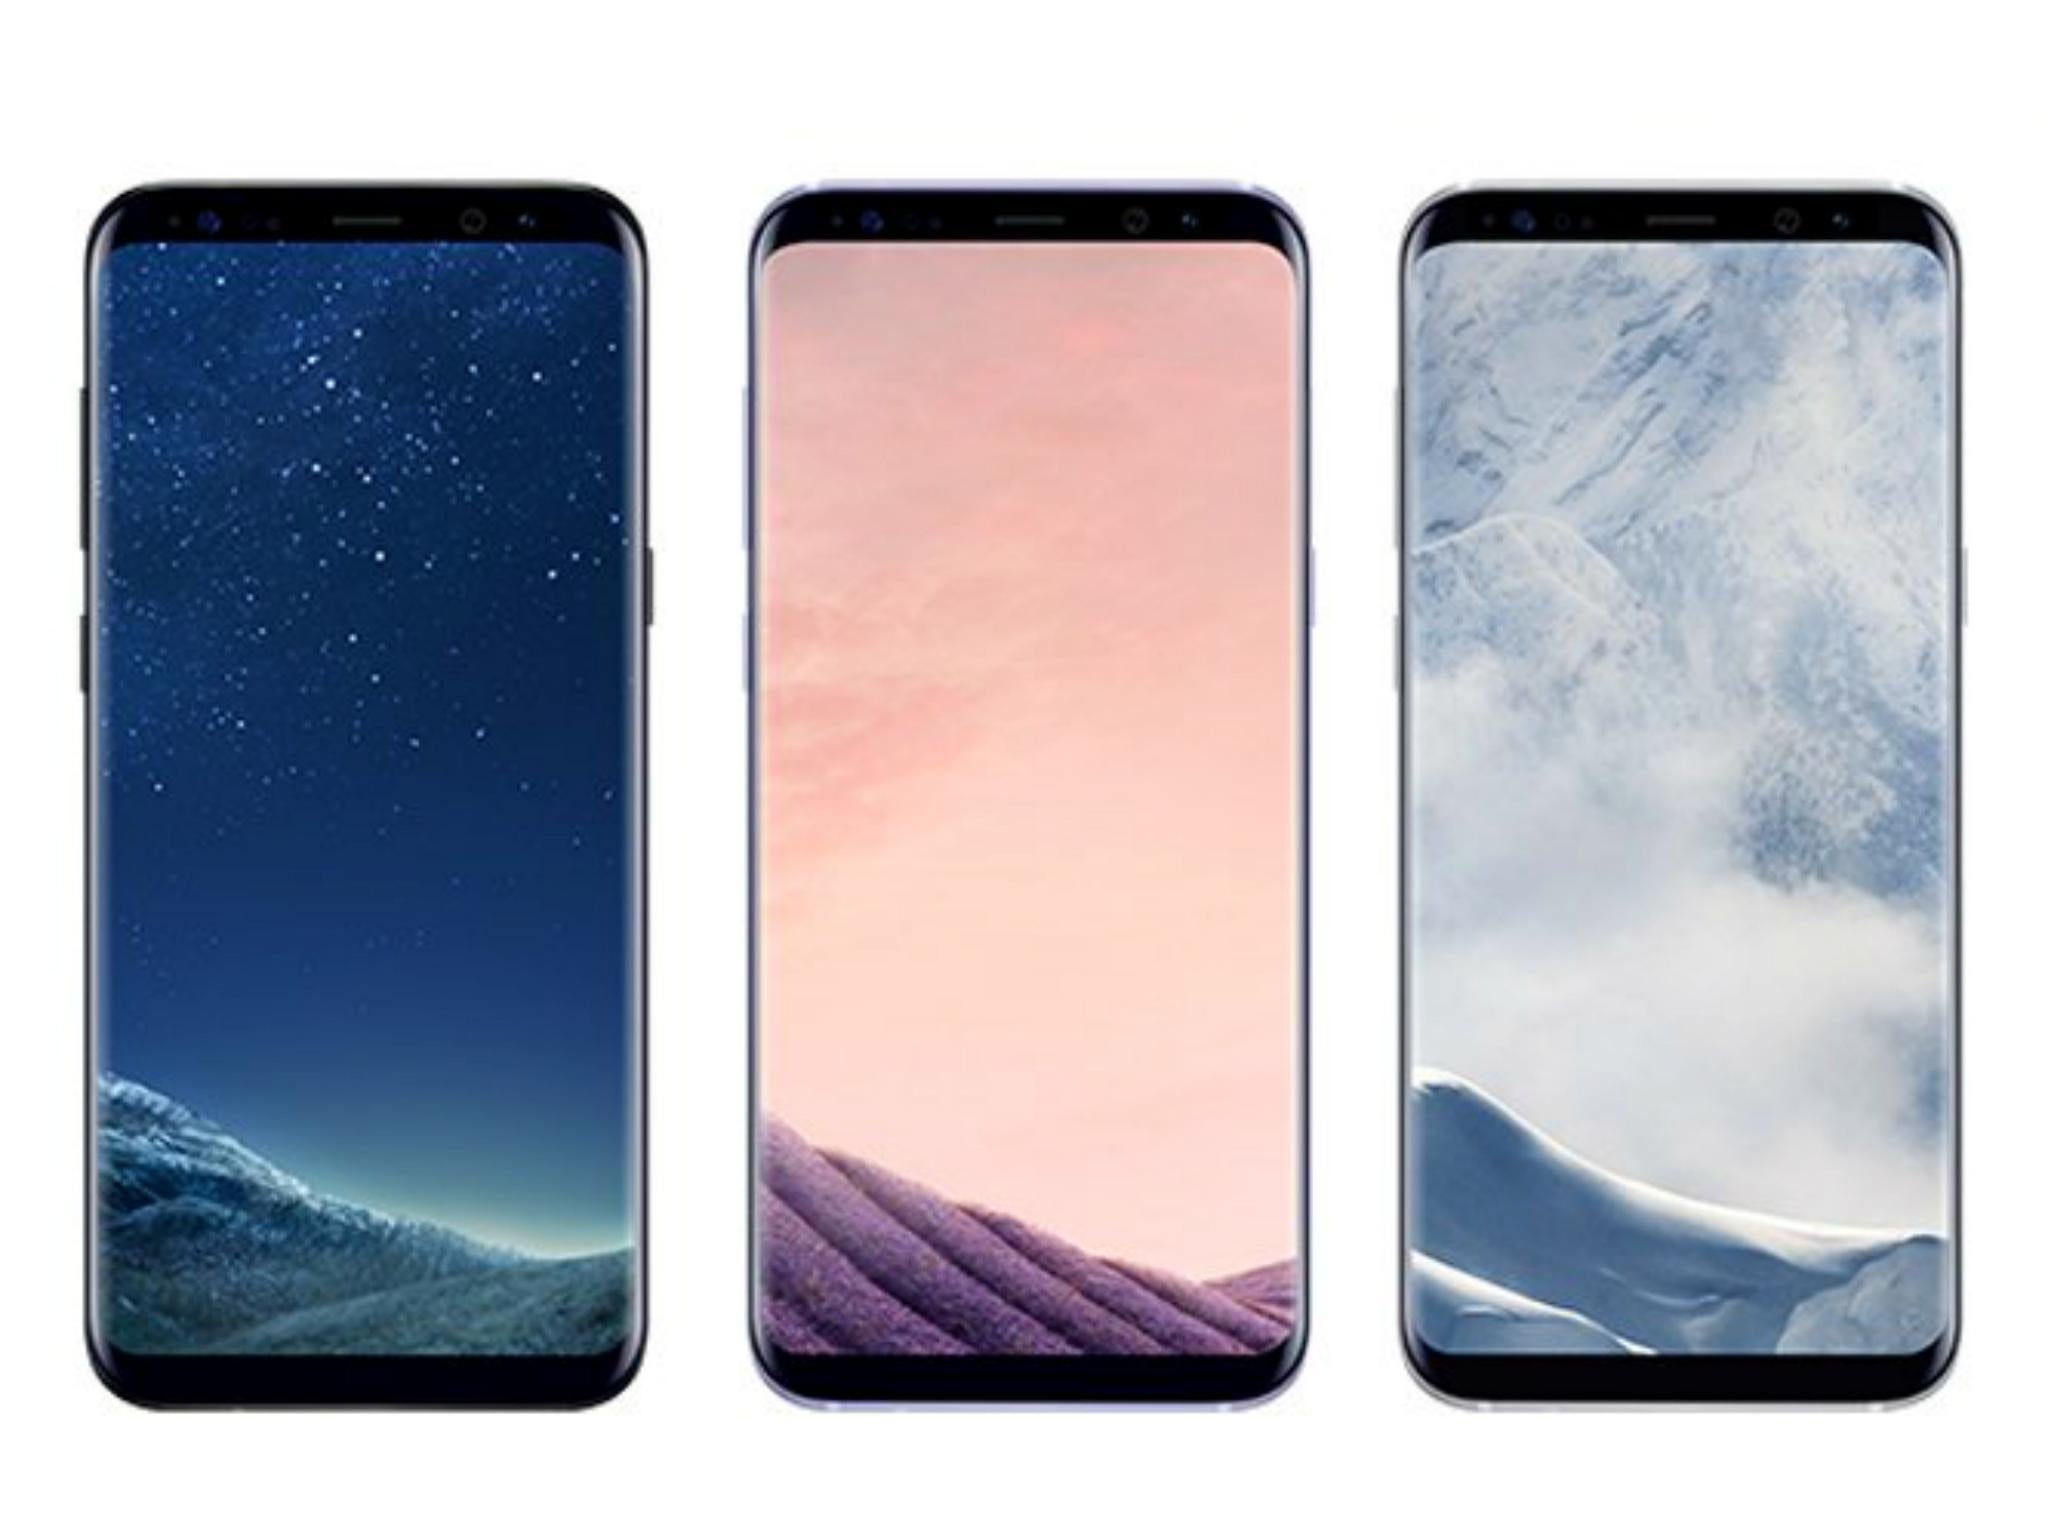 The S8 will supposedly be available in 'black sky', 'orchid grey' and 'arctic silver' colour schemes